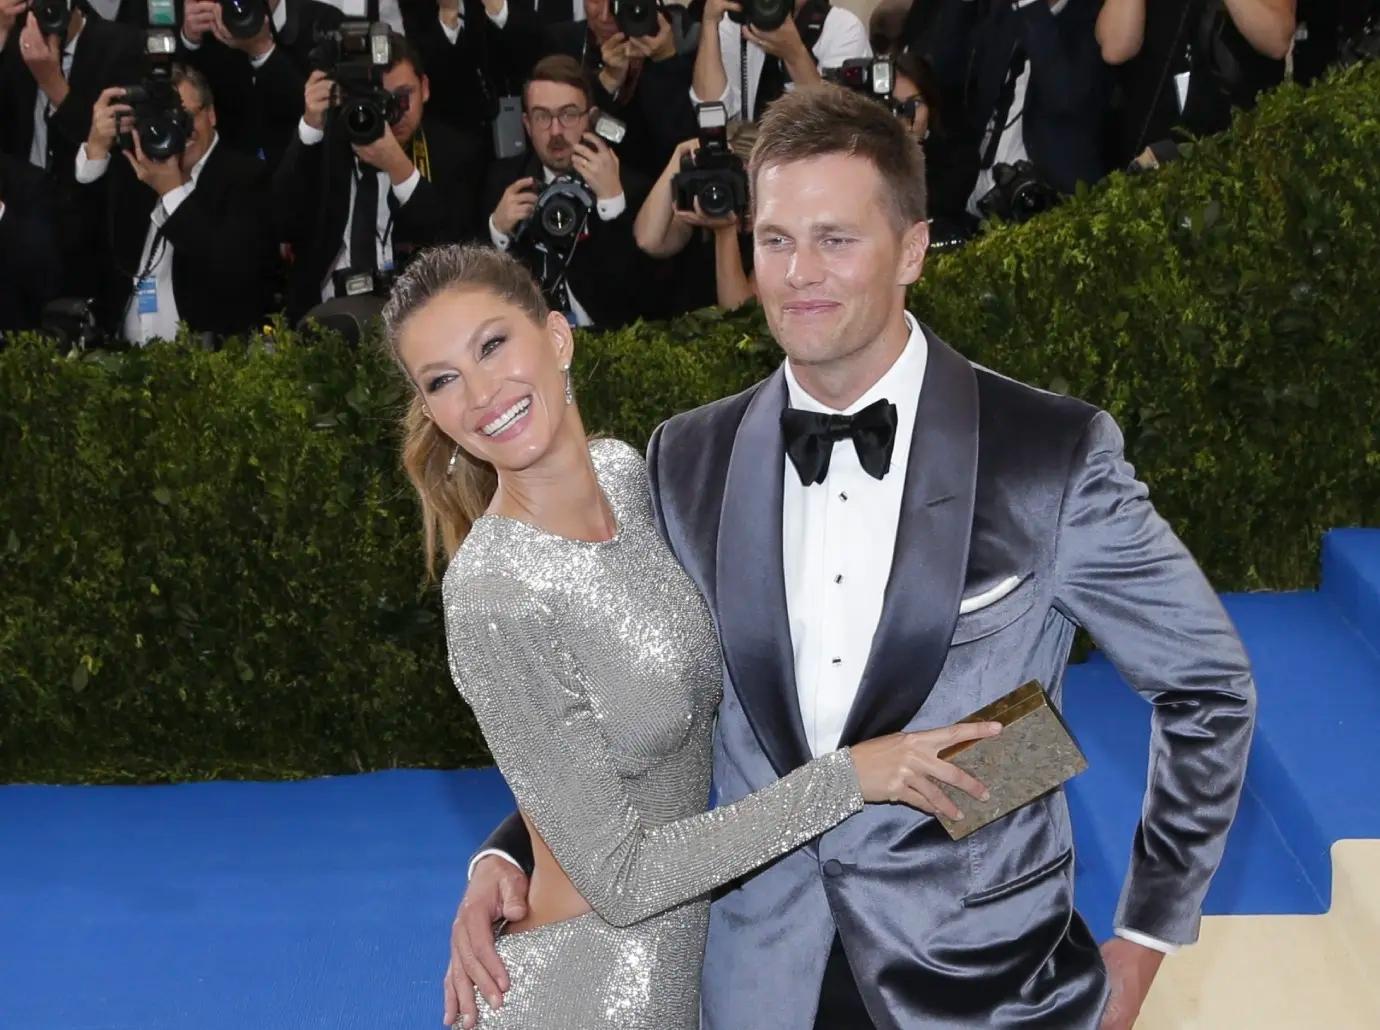 Tom Brady admits to failures, talks co-parenting with Gisele Bündchen  following divorce